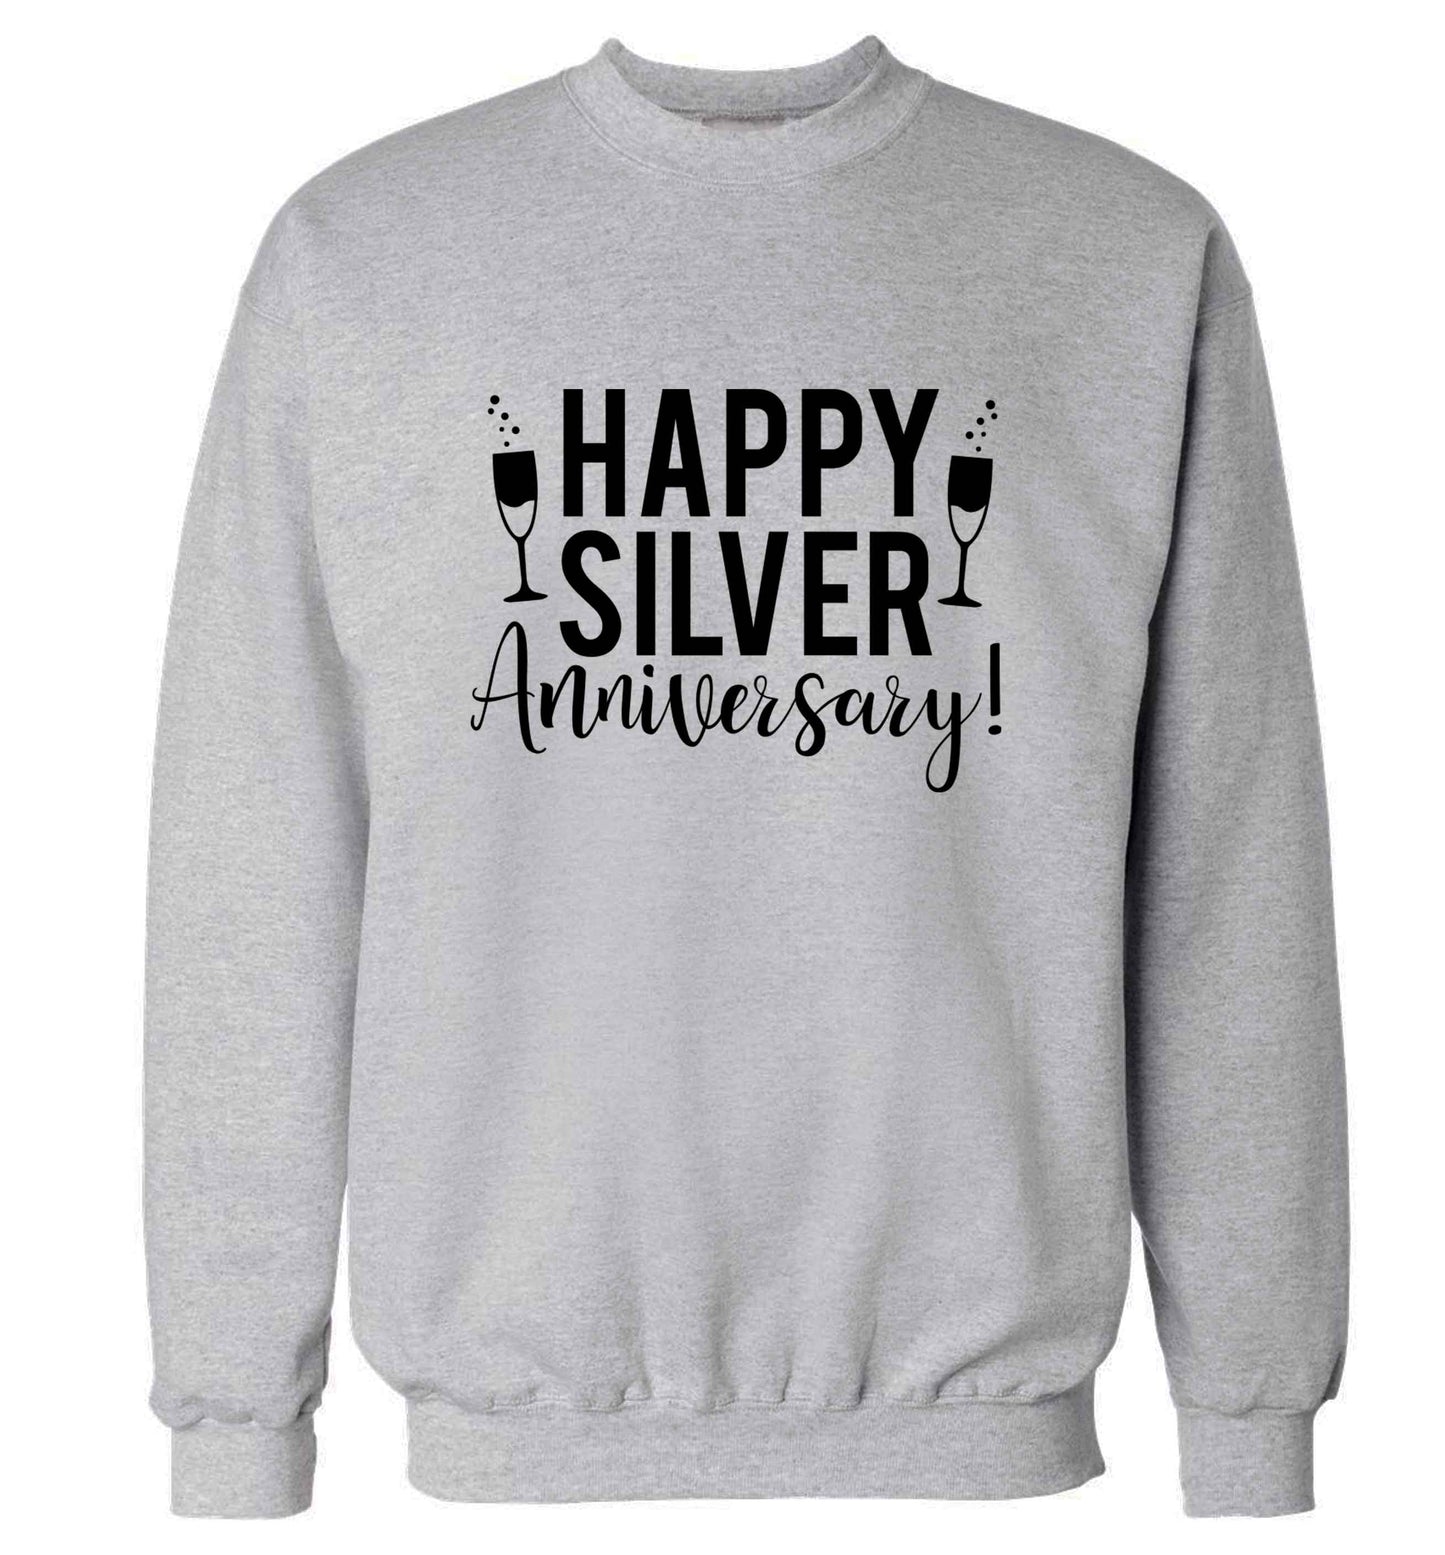 Happy silver anniversary! adult's unisex grey sweater 2XL